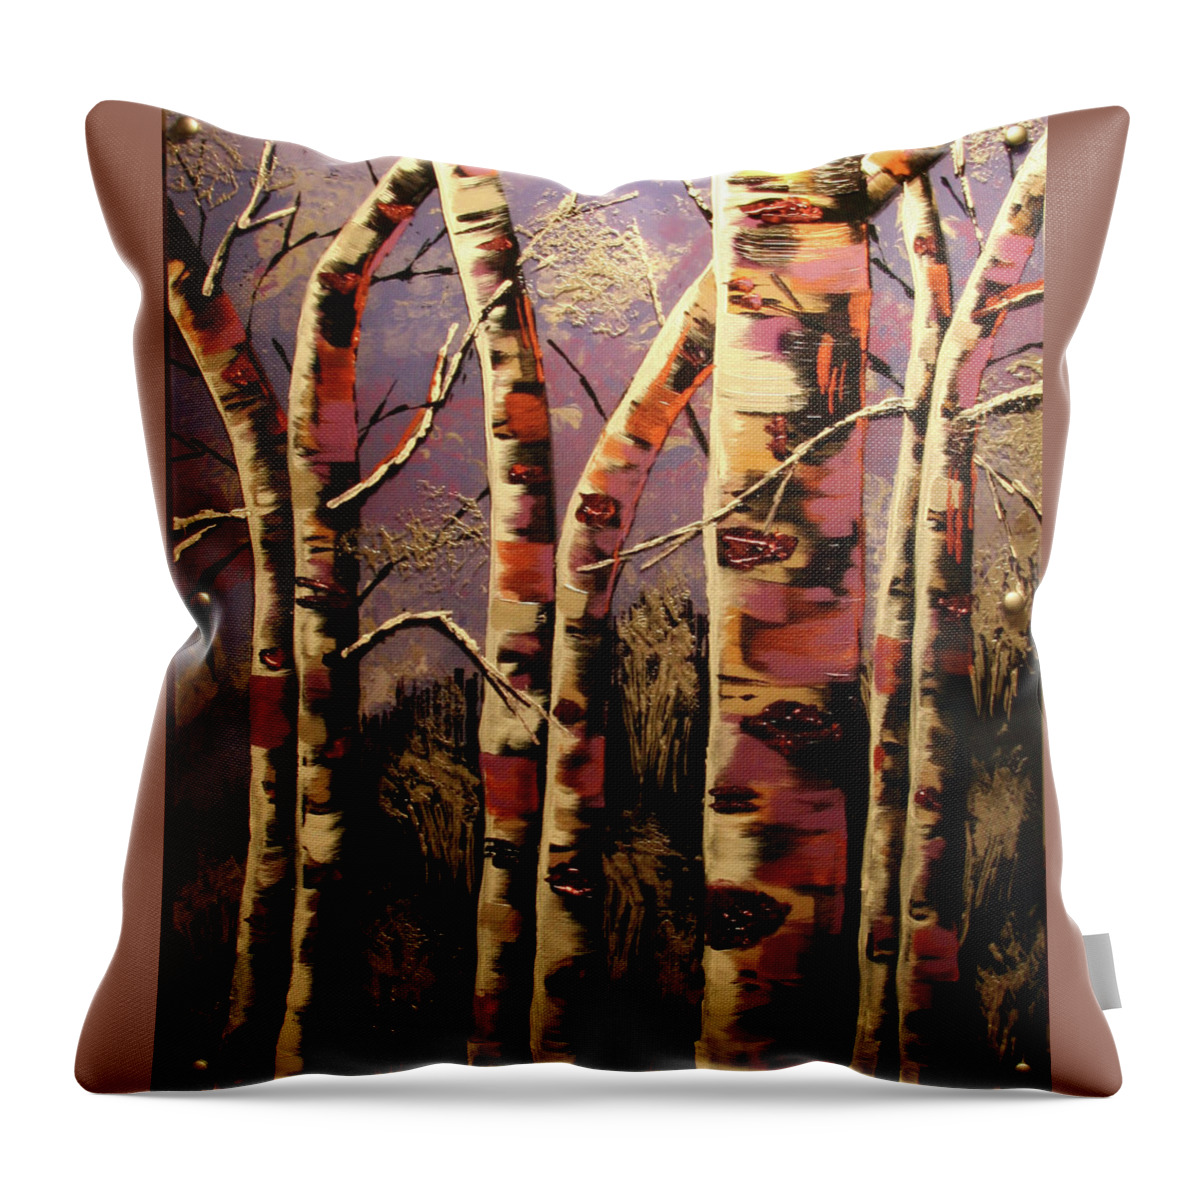 Aspen Throw Pillow featuring the painting Silvery Aspen by Marilyn Quigley